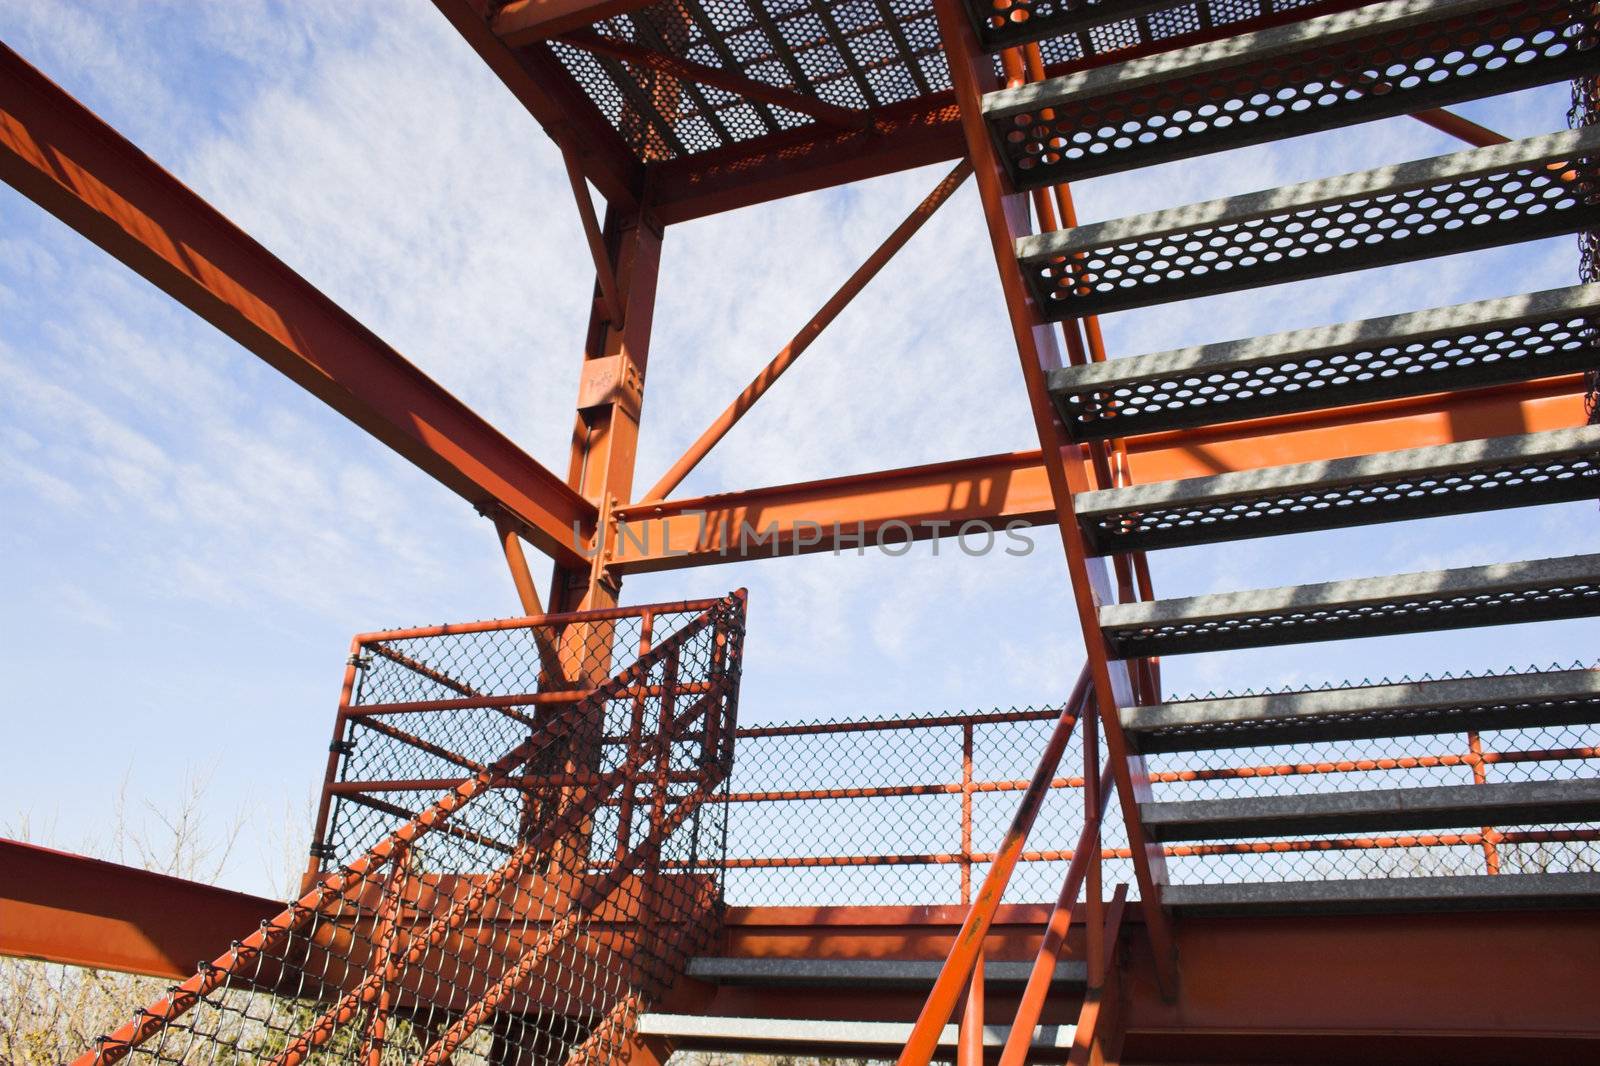 Metal abstracts of various bridges and ladders